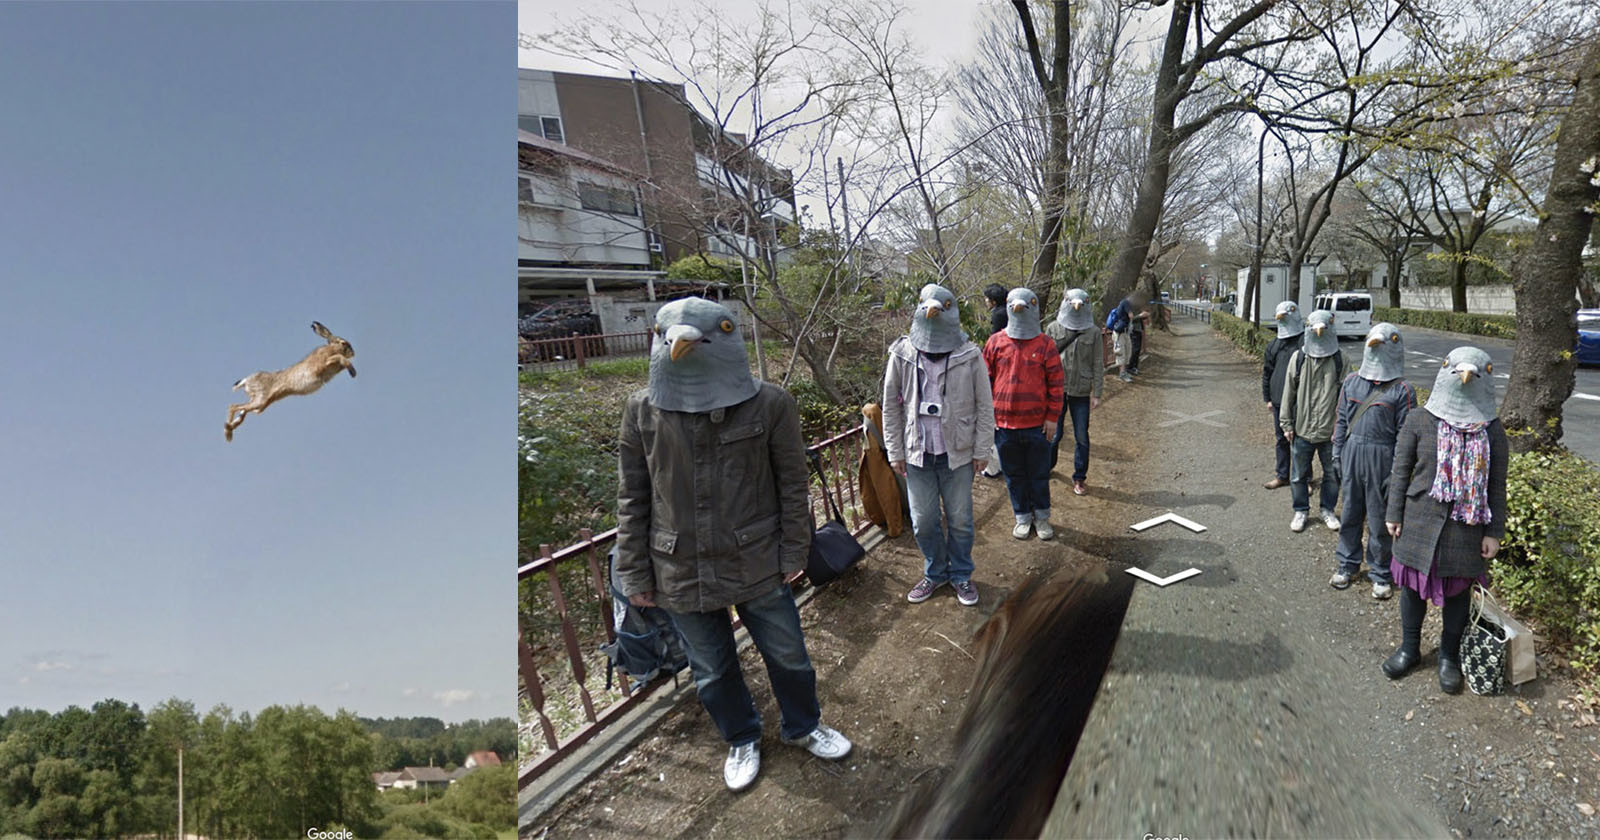 Wonders of Street View Highlights the Most Bizarre Scenes on Google Maps